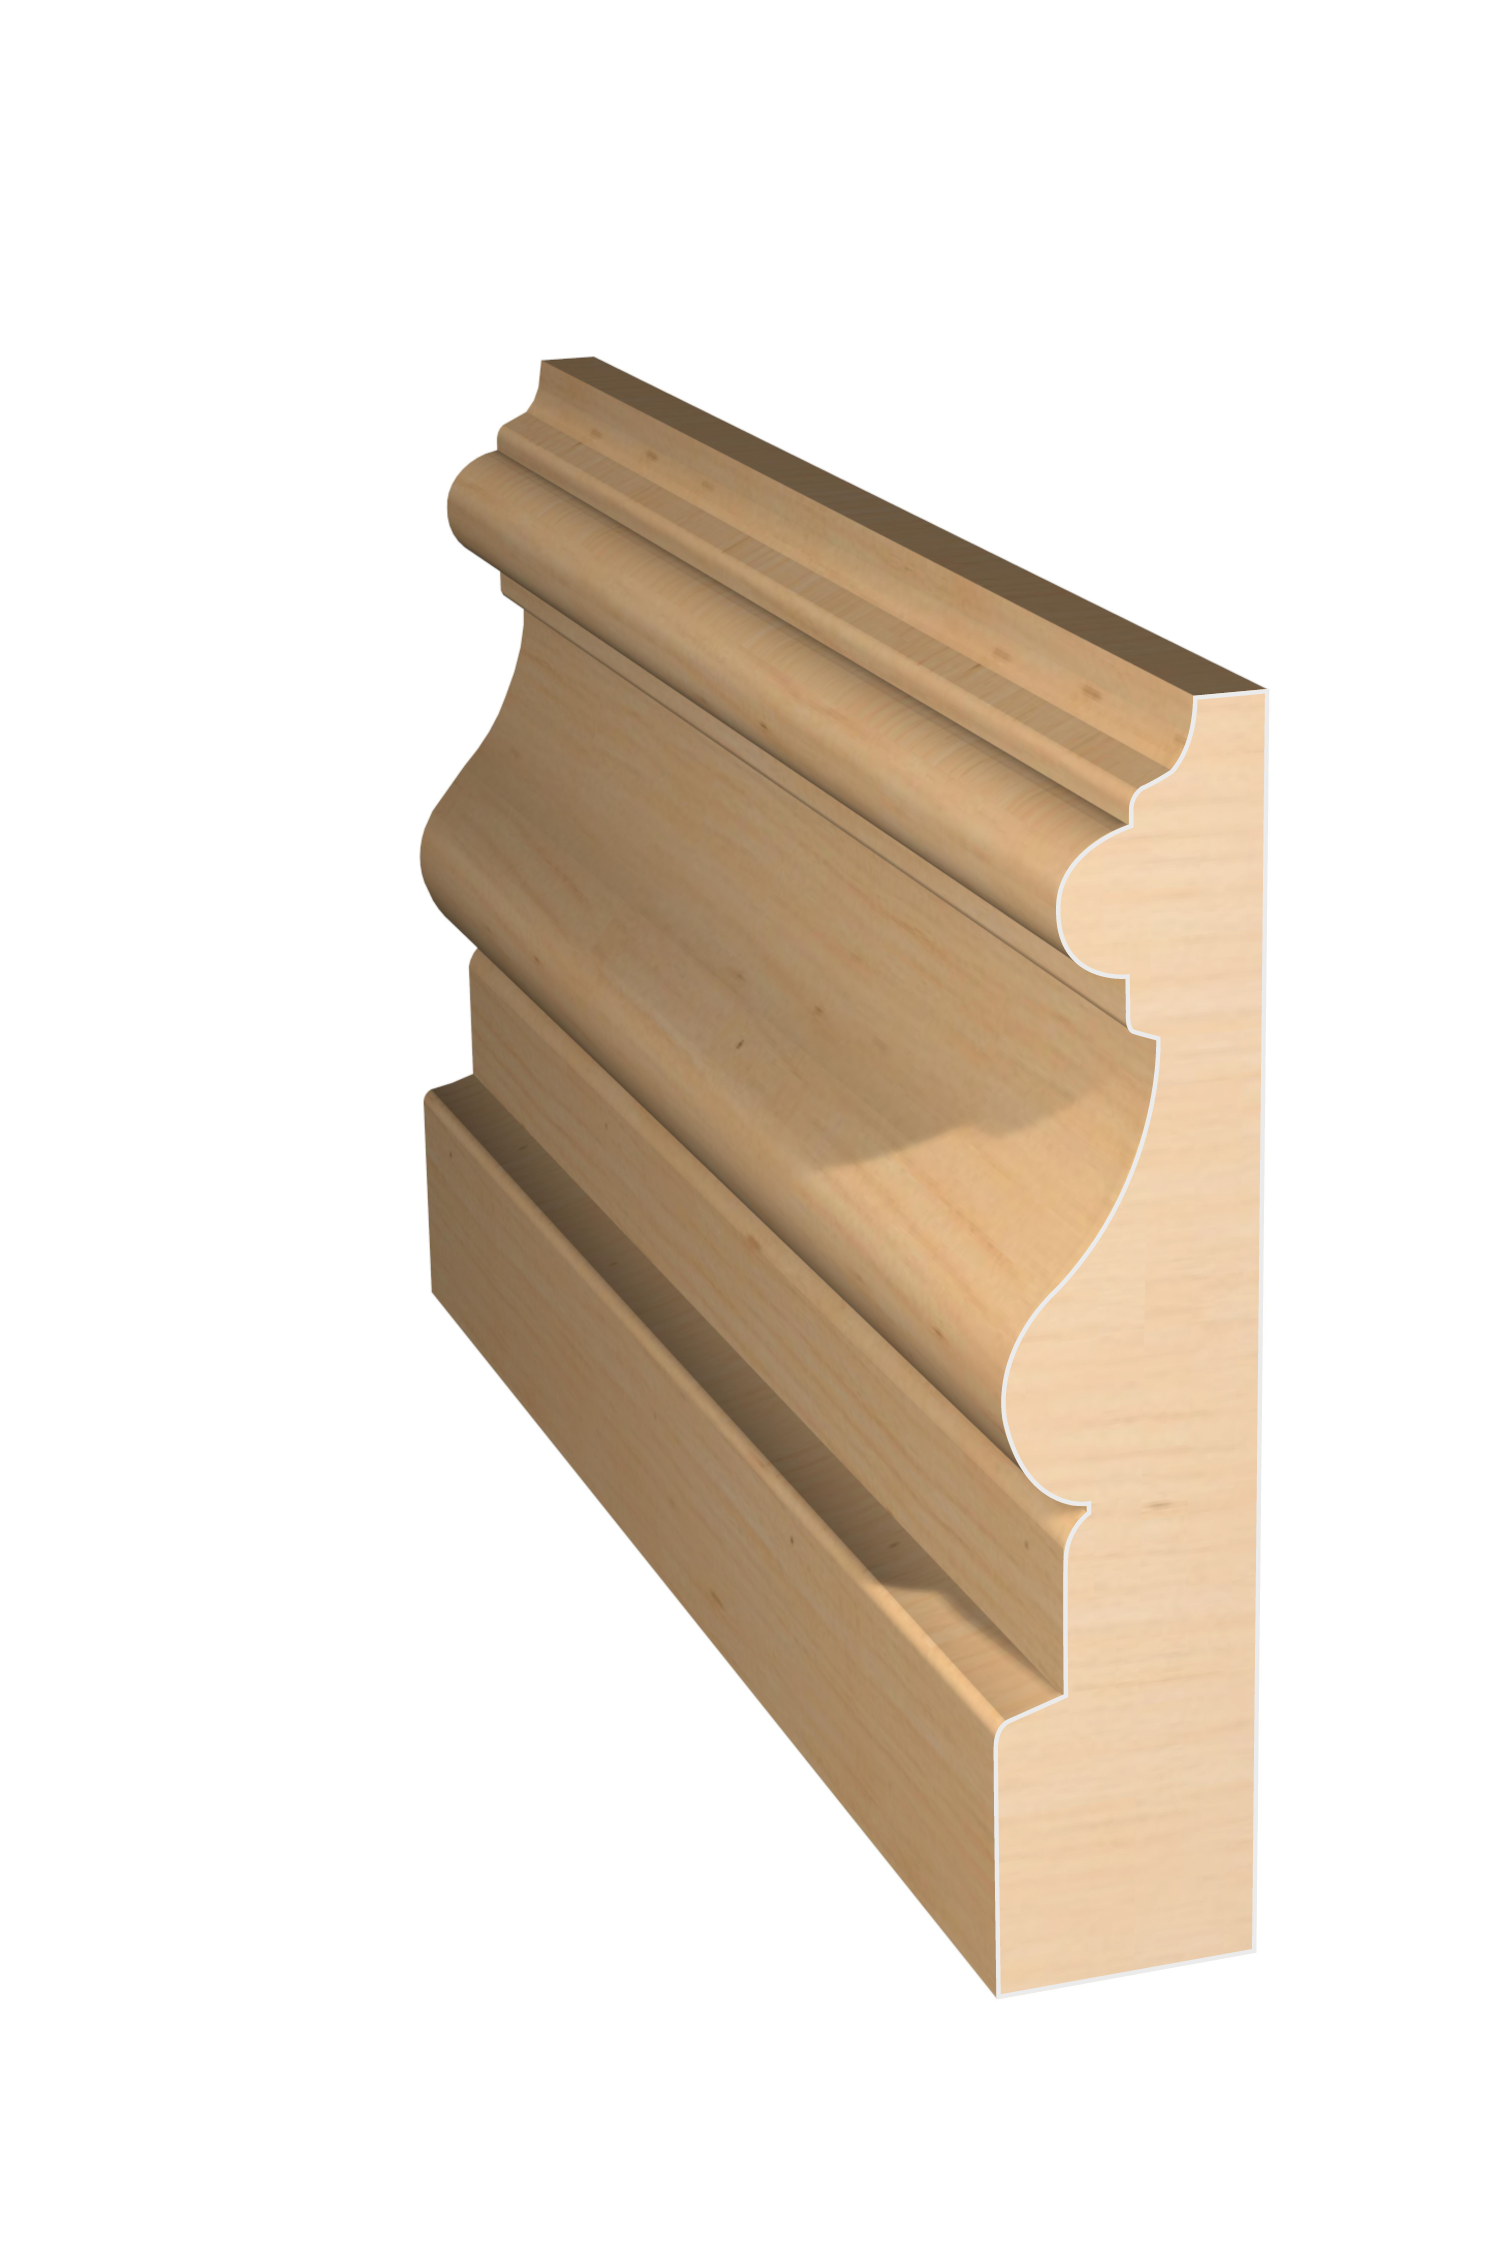 Three dimensional rendering of custom casing wood molding CAPL31224 made by Public Lumber Company in Detroit.